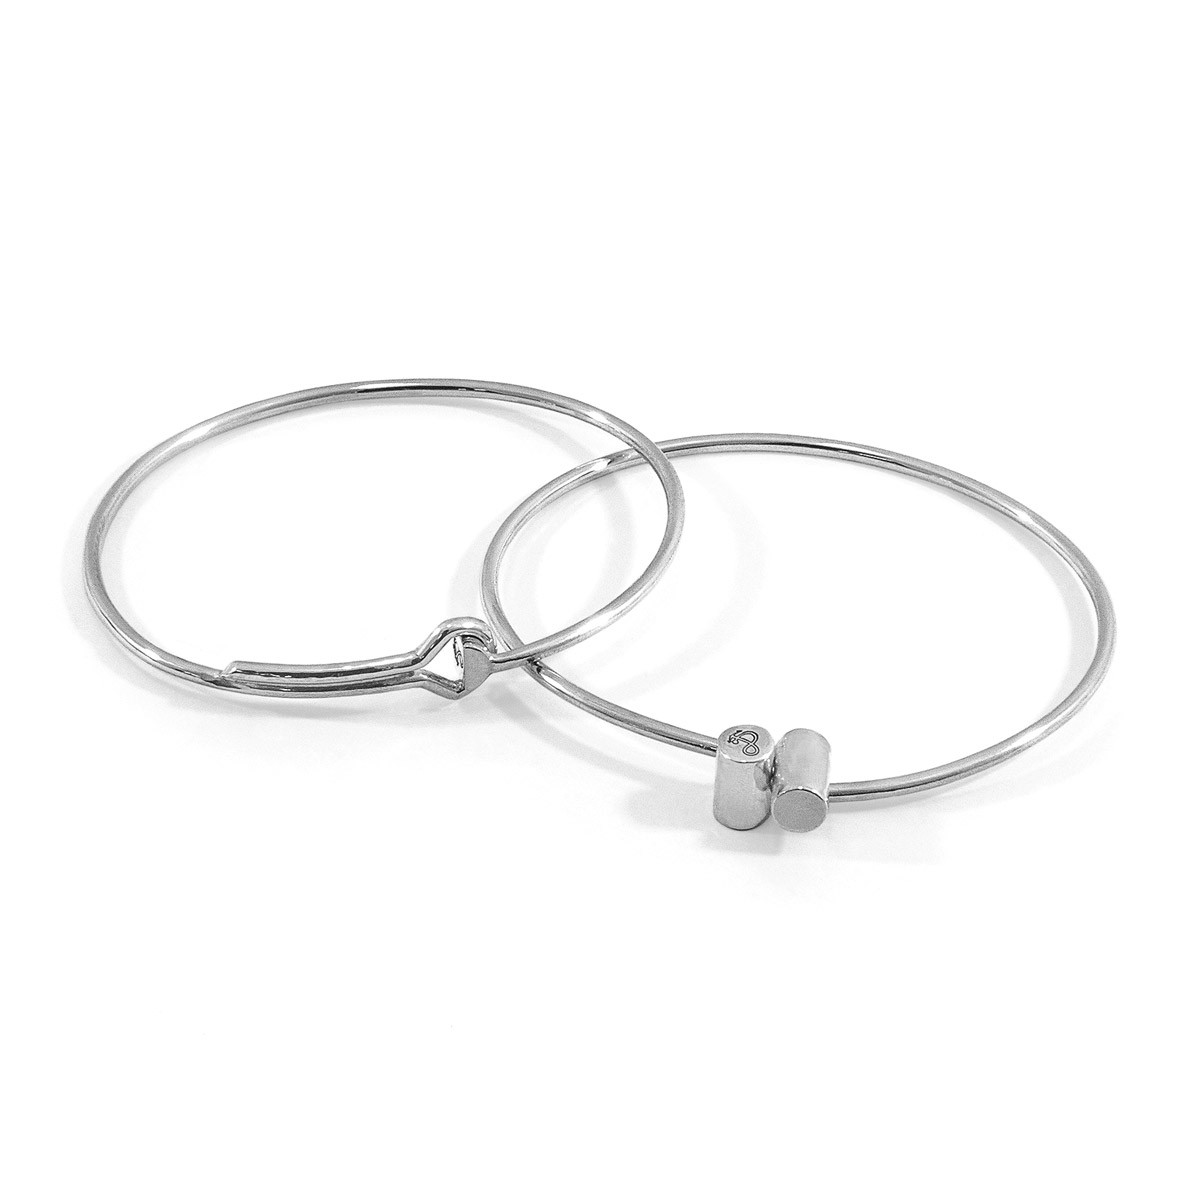 Anchor & Crew Silver Sutton and Wynne Geometric Bangle Collection